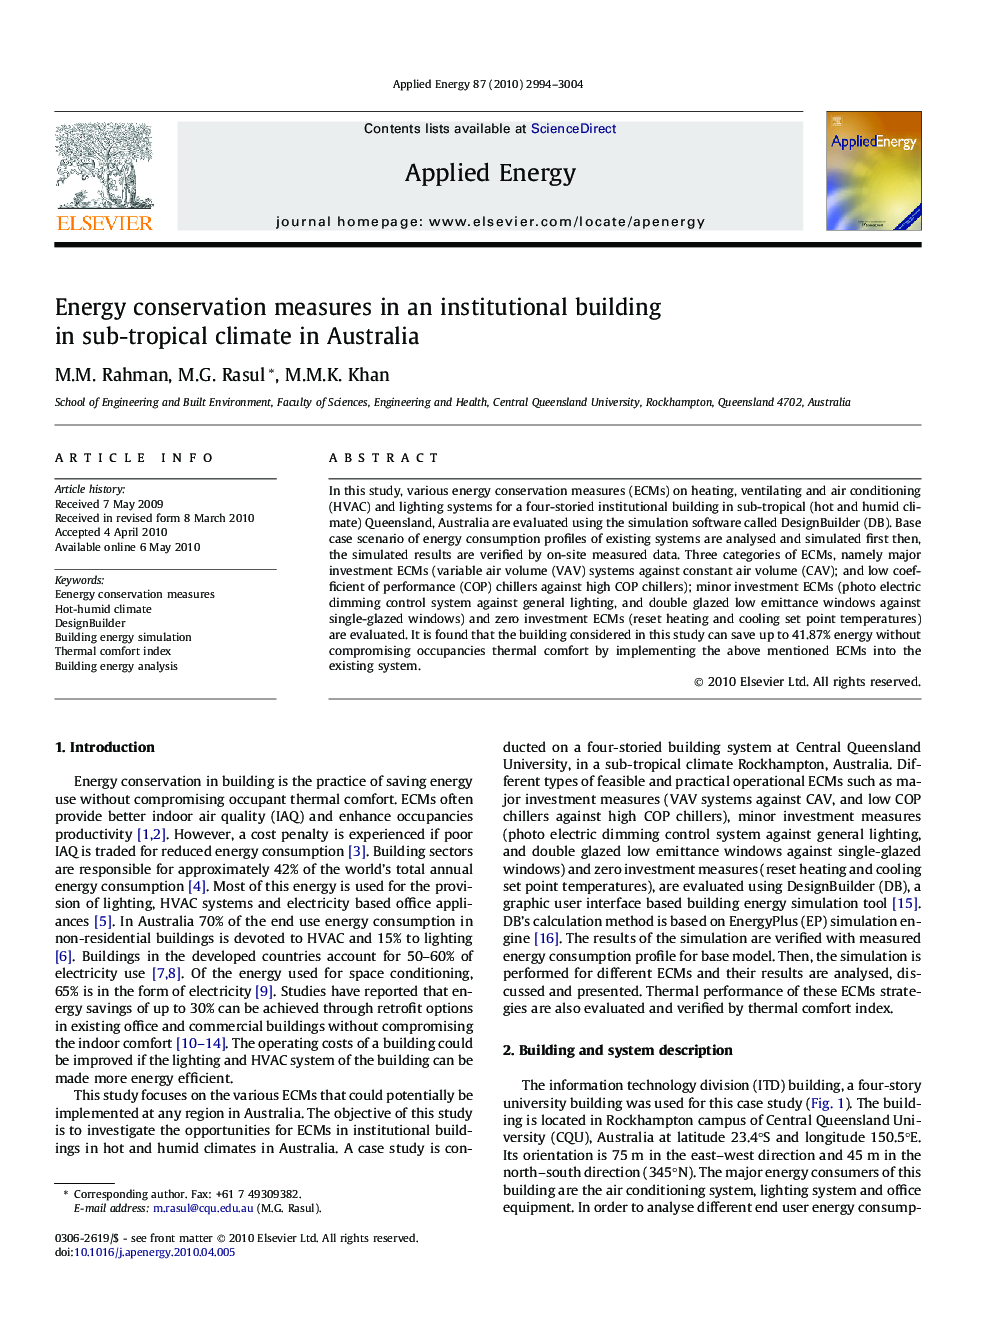 Energy conservation measures in an institutional building in sub-tropical climate in Australia